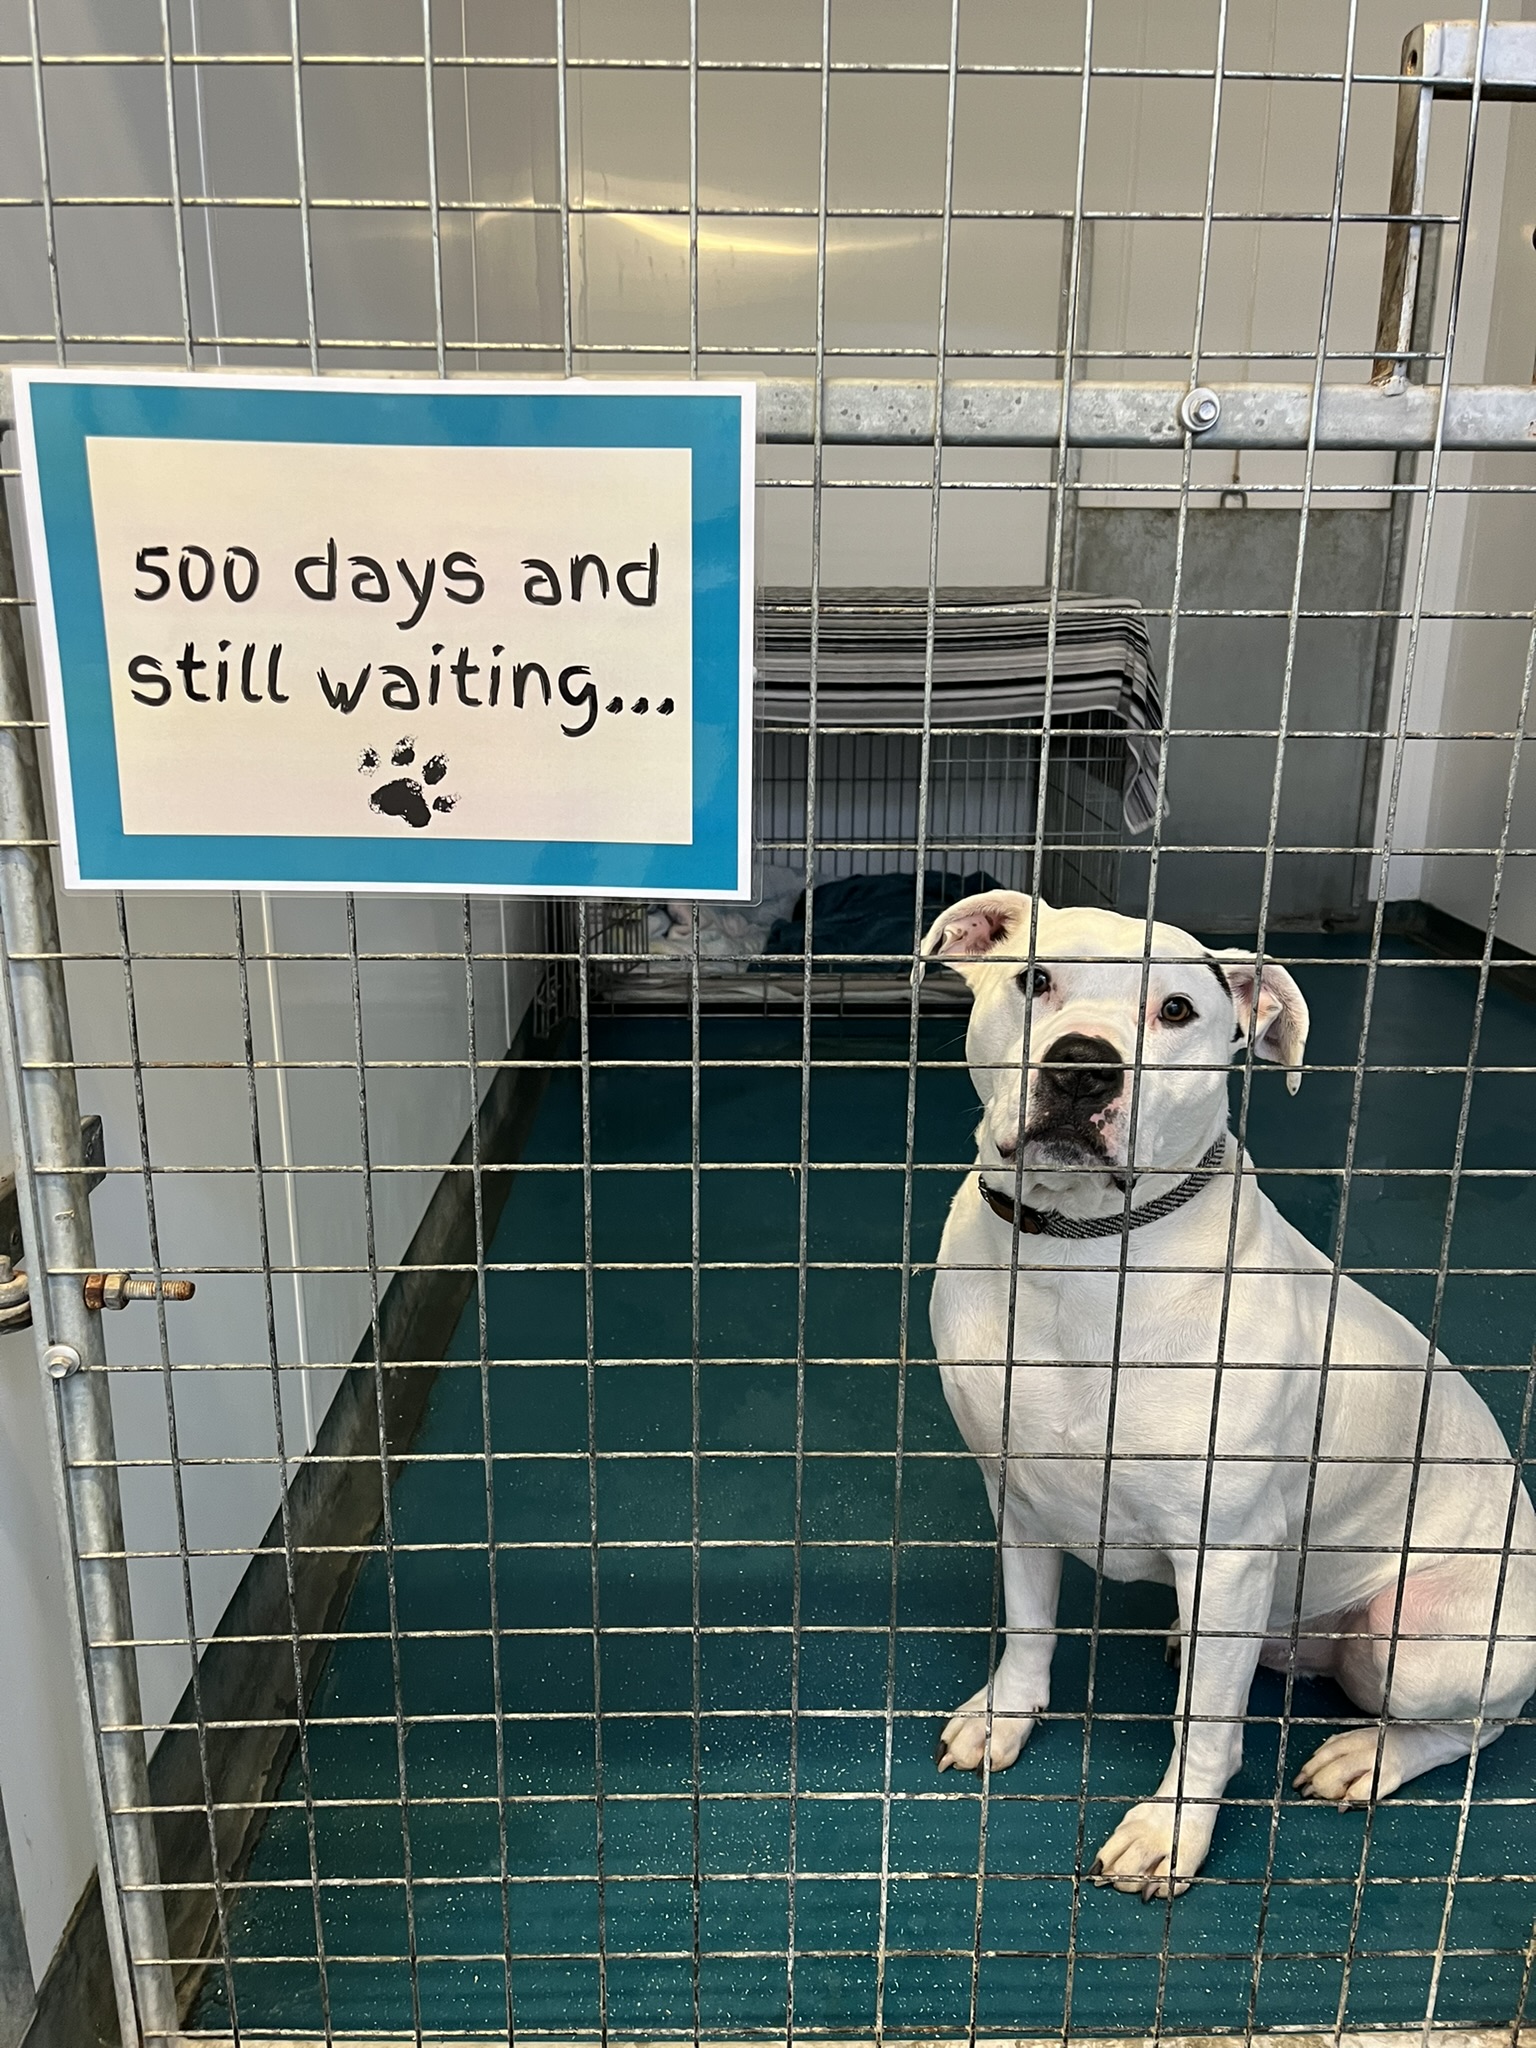 Zeus’s Quest for Forever Home Passes 500 Days